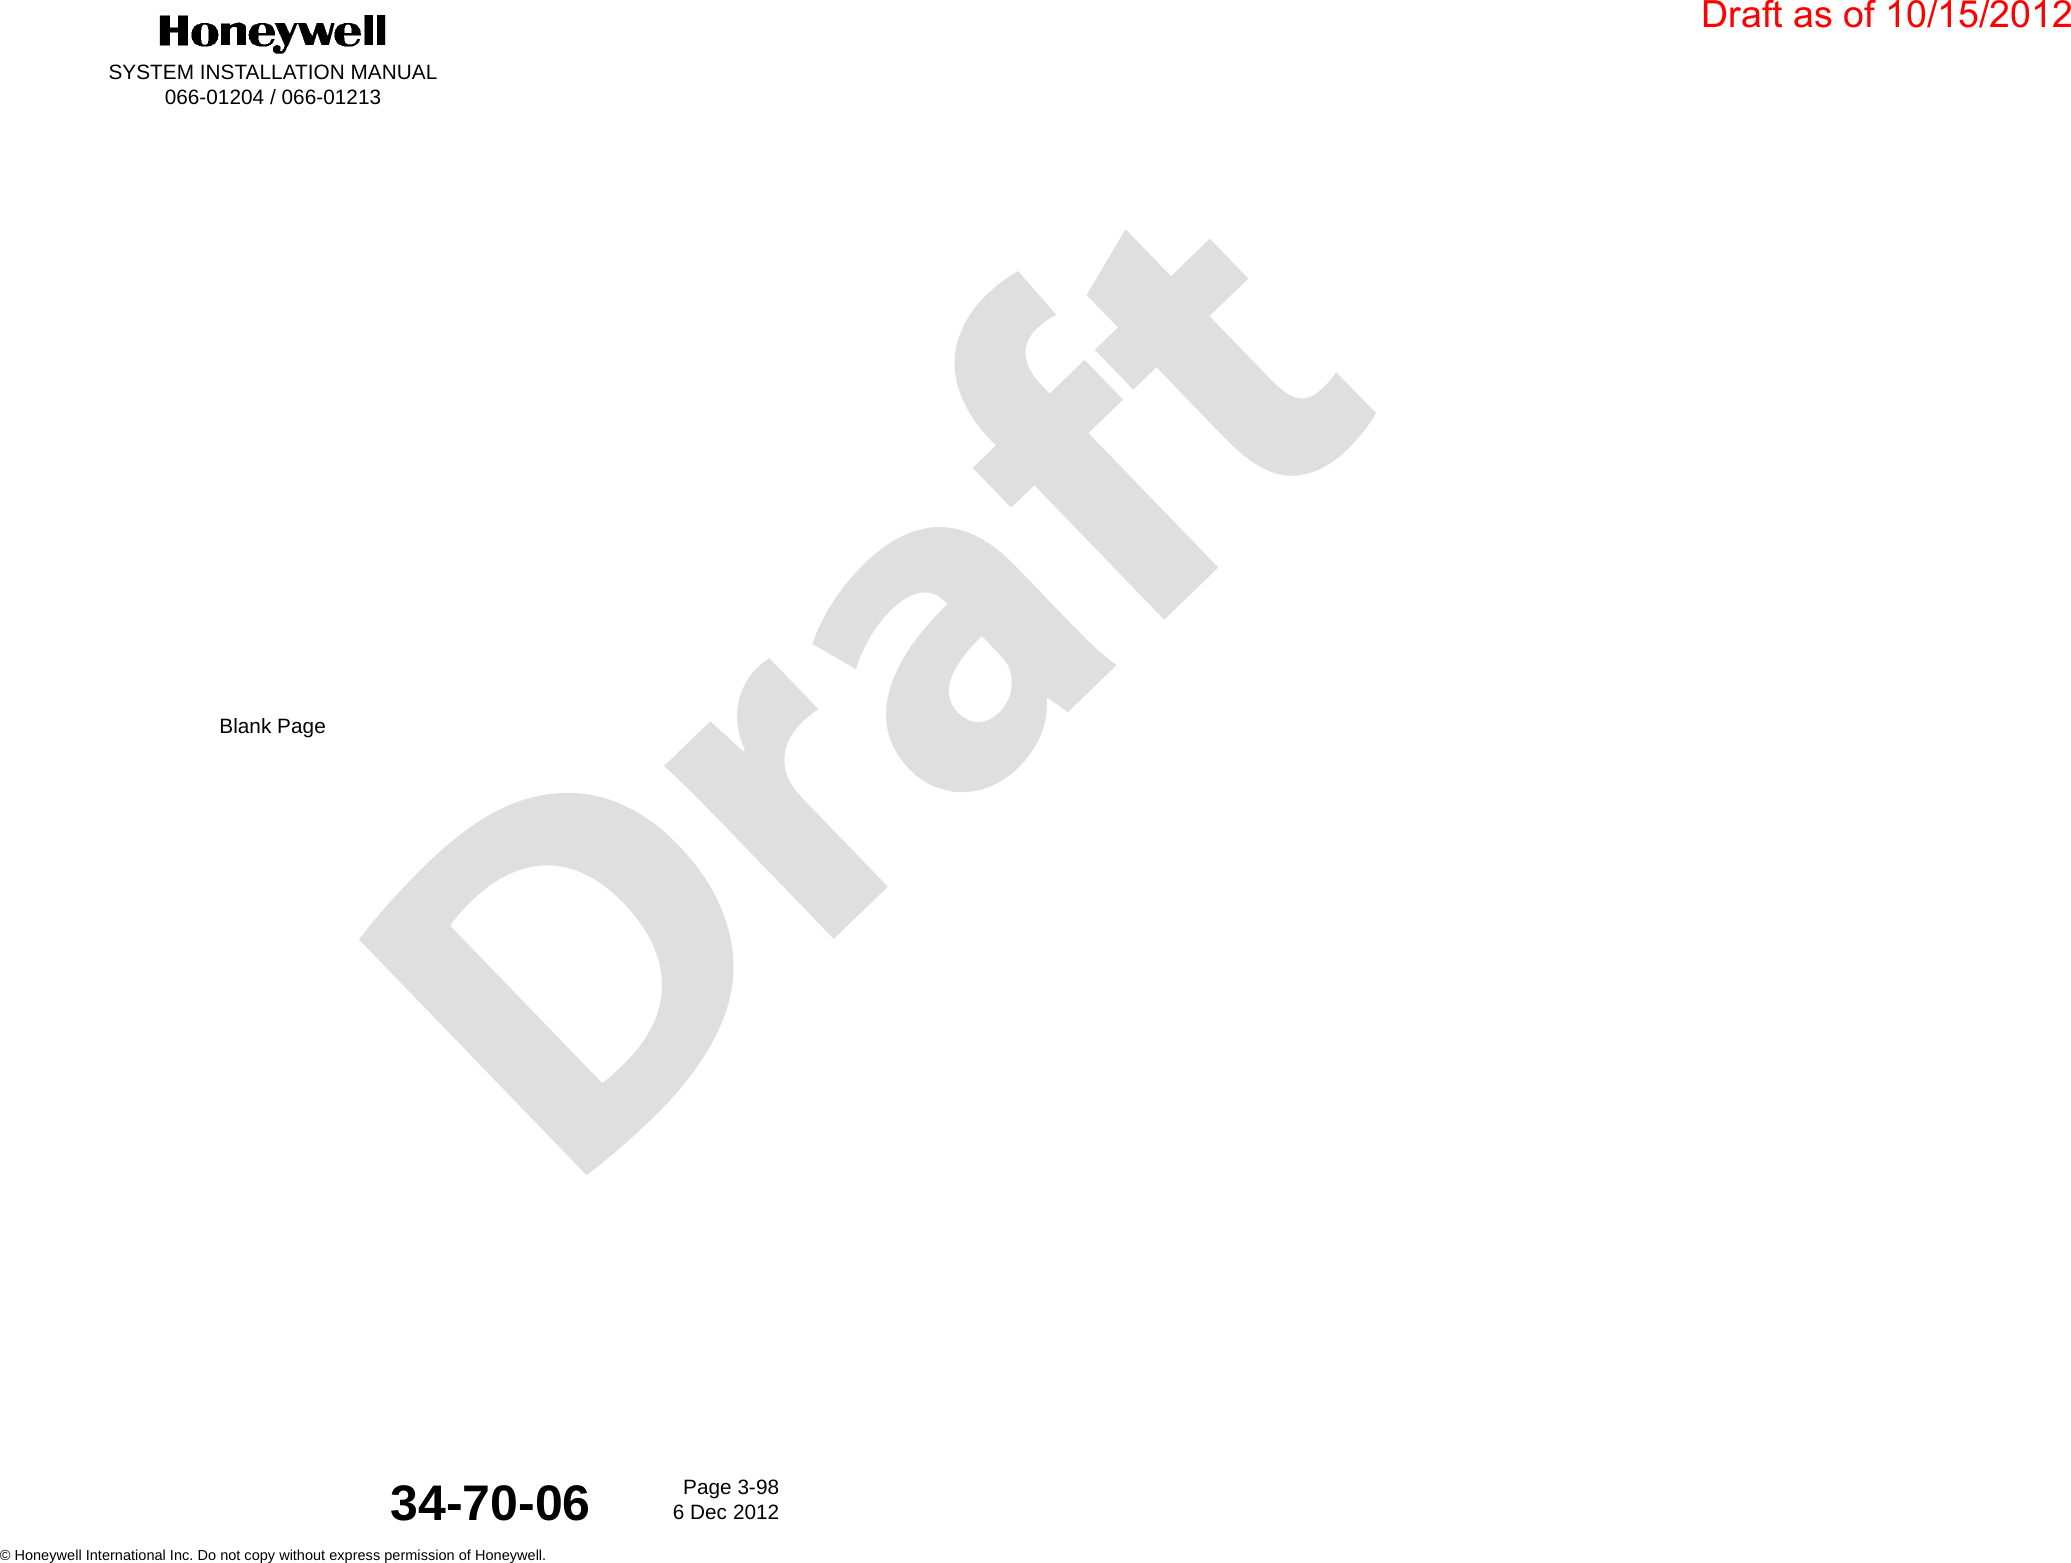 DraftSYSTEM INSTALLATION MANUAL066-01204 / 066-01213Page 3-986 Dec 2012© Honeywell International Inc. Do not copy without express permission of Honeywell.34-70-06Blank PageDraft as of 10/15/2012